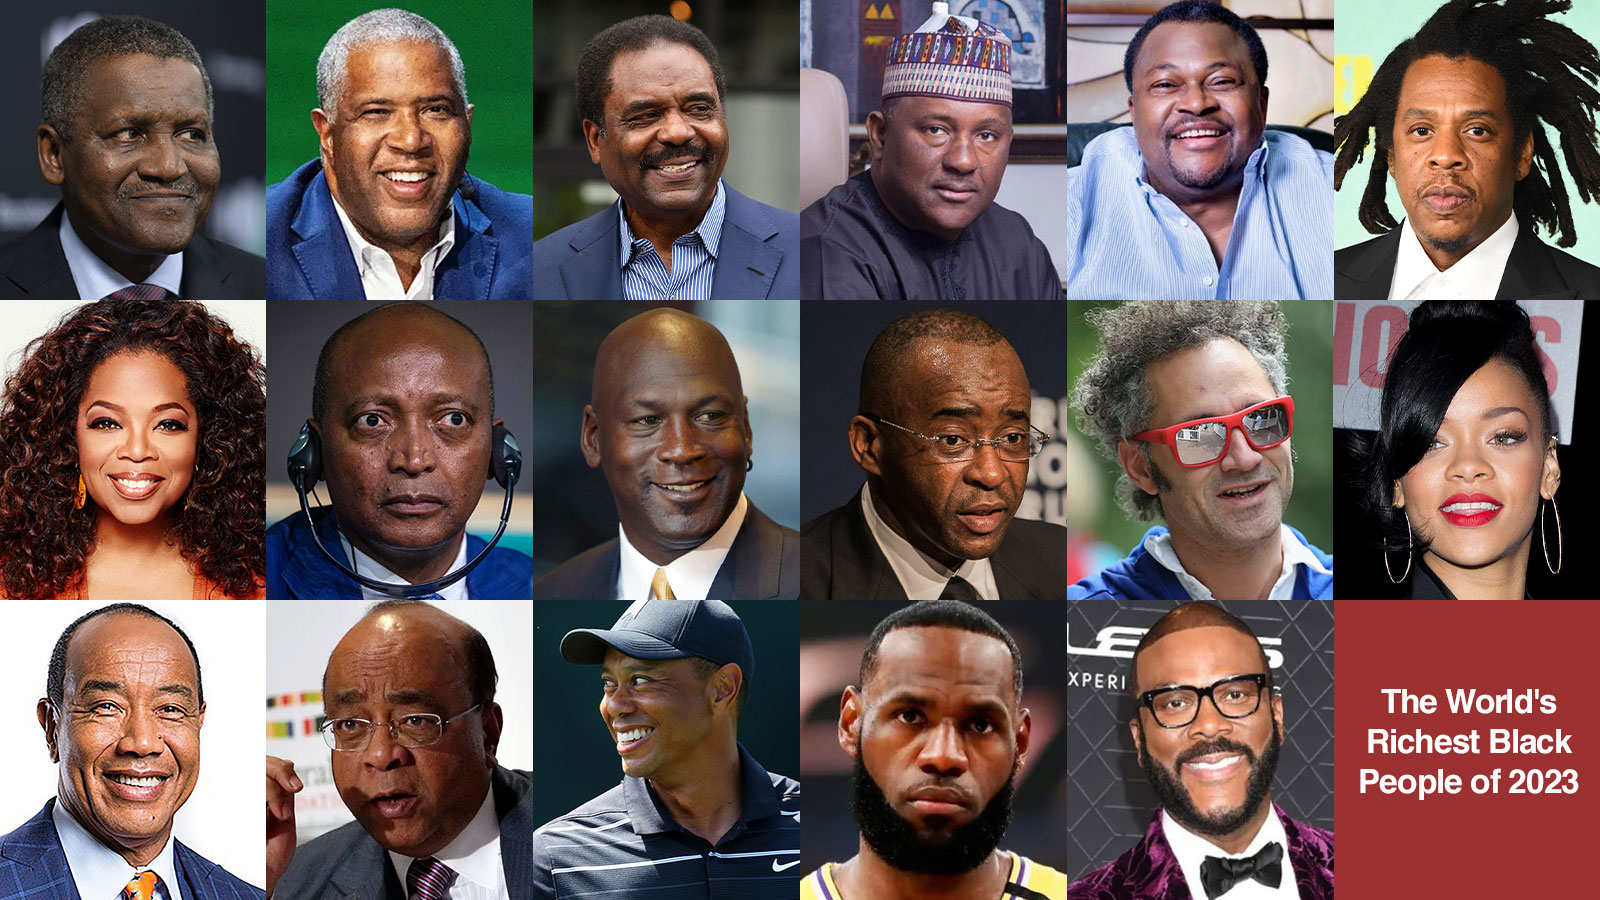 The world’s richest Black people of 2023